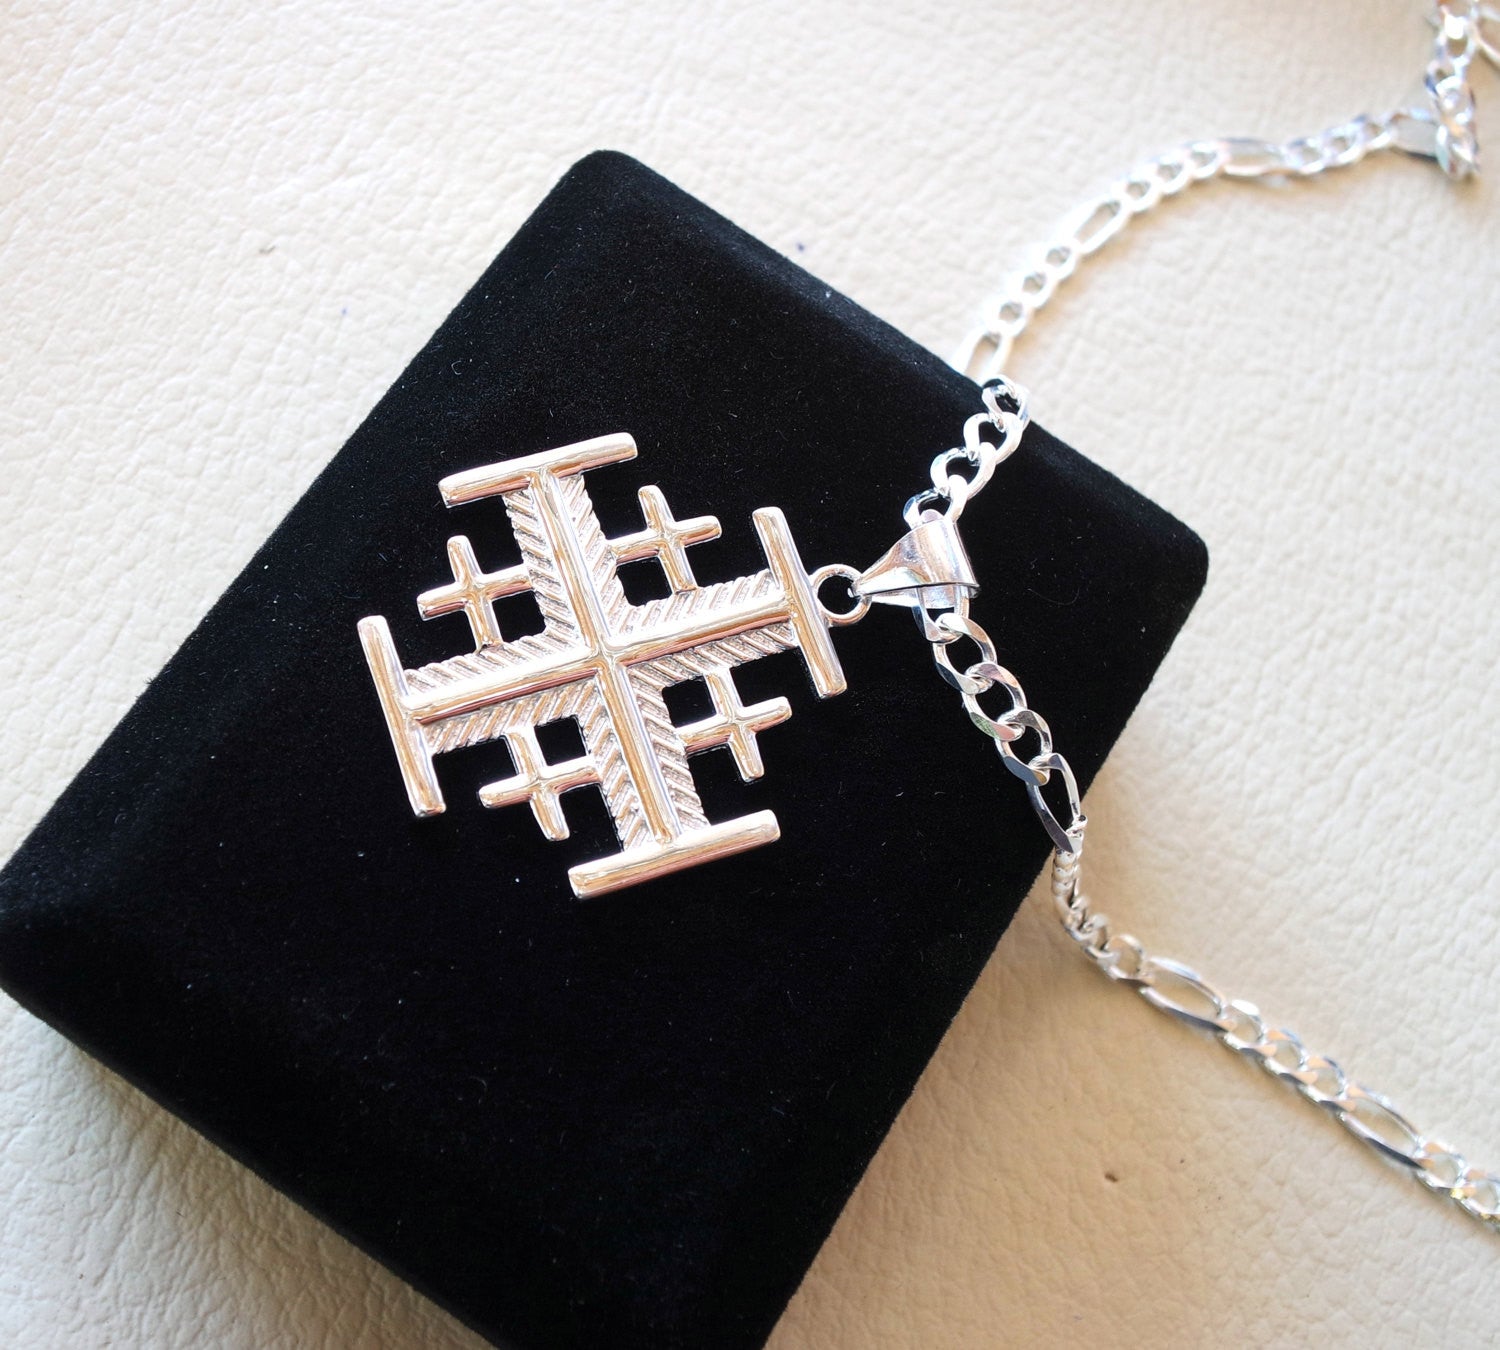 Jerusalem cross pendant with heavy chain sterling silver 925 middle eastern jewelry christianity vintage handmade heavy fast shipping